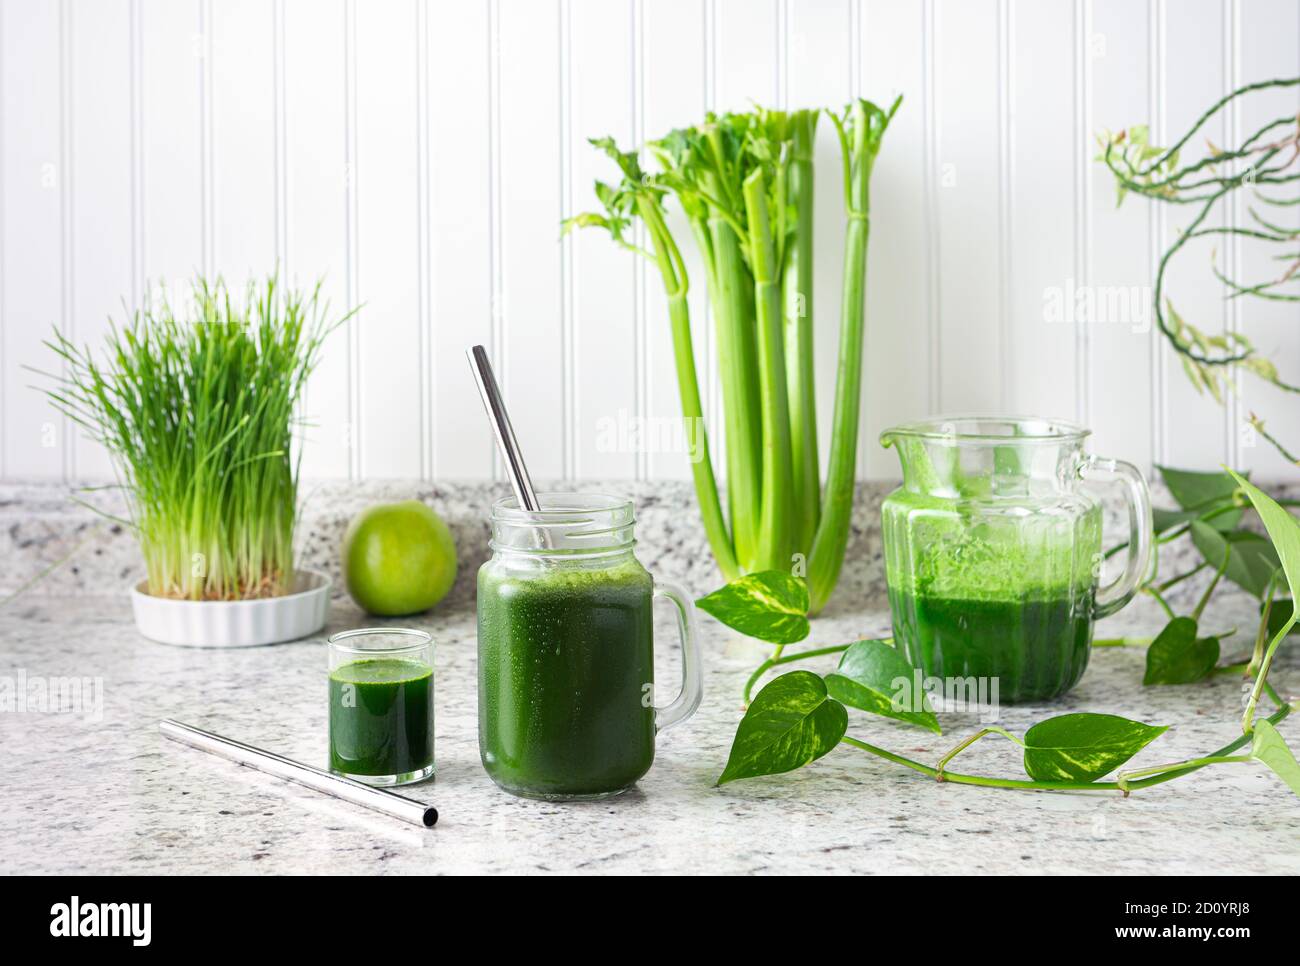 Concept of fresh, immune boosting green juice and raw vegetables Stock Photo